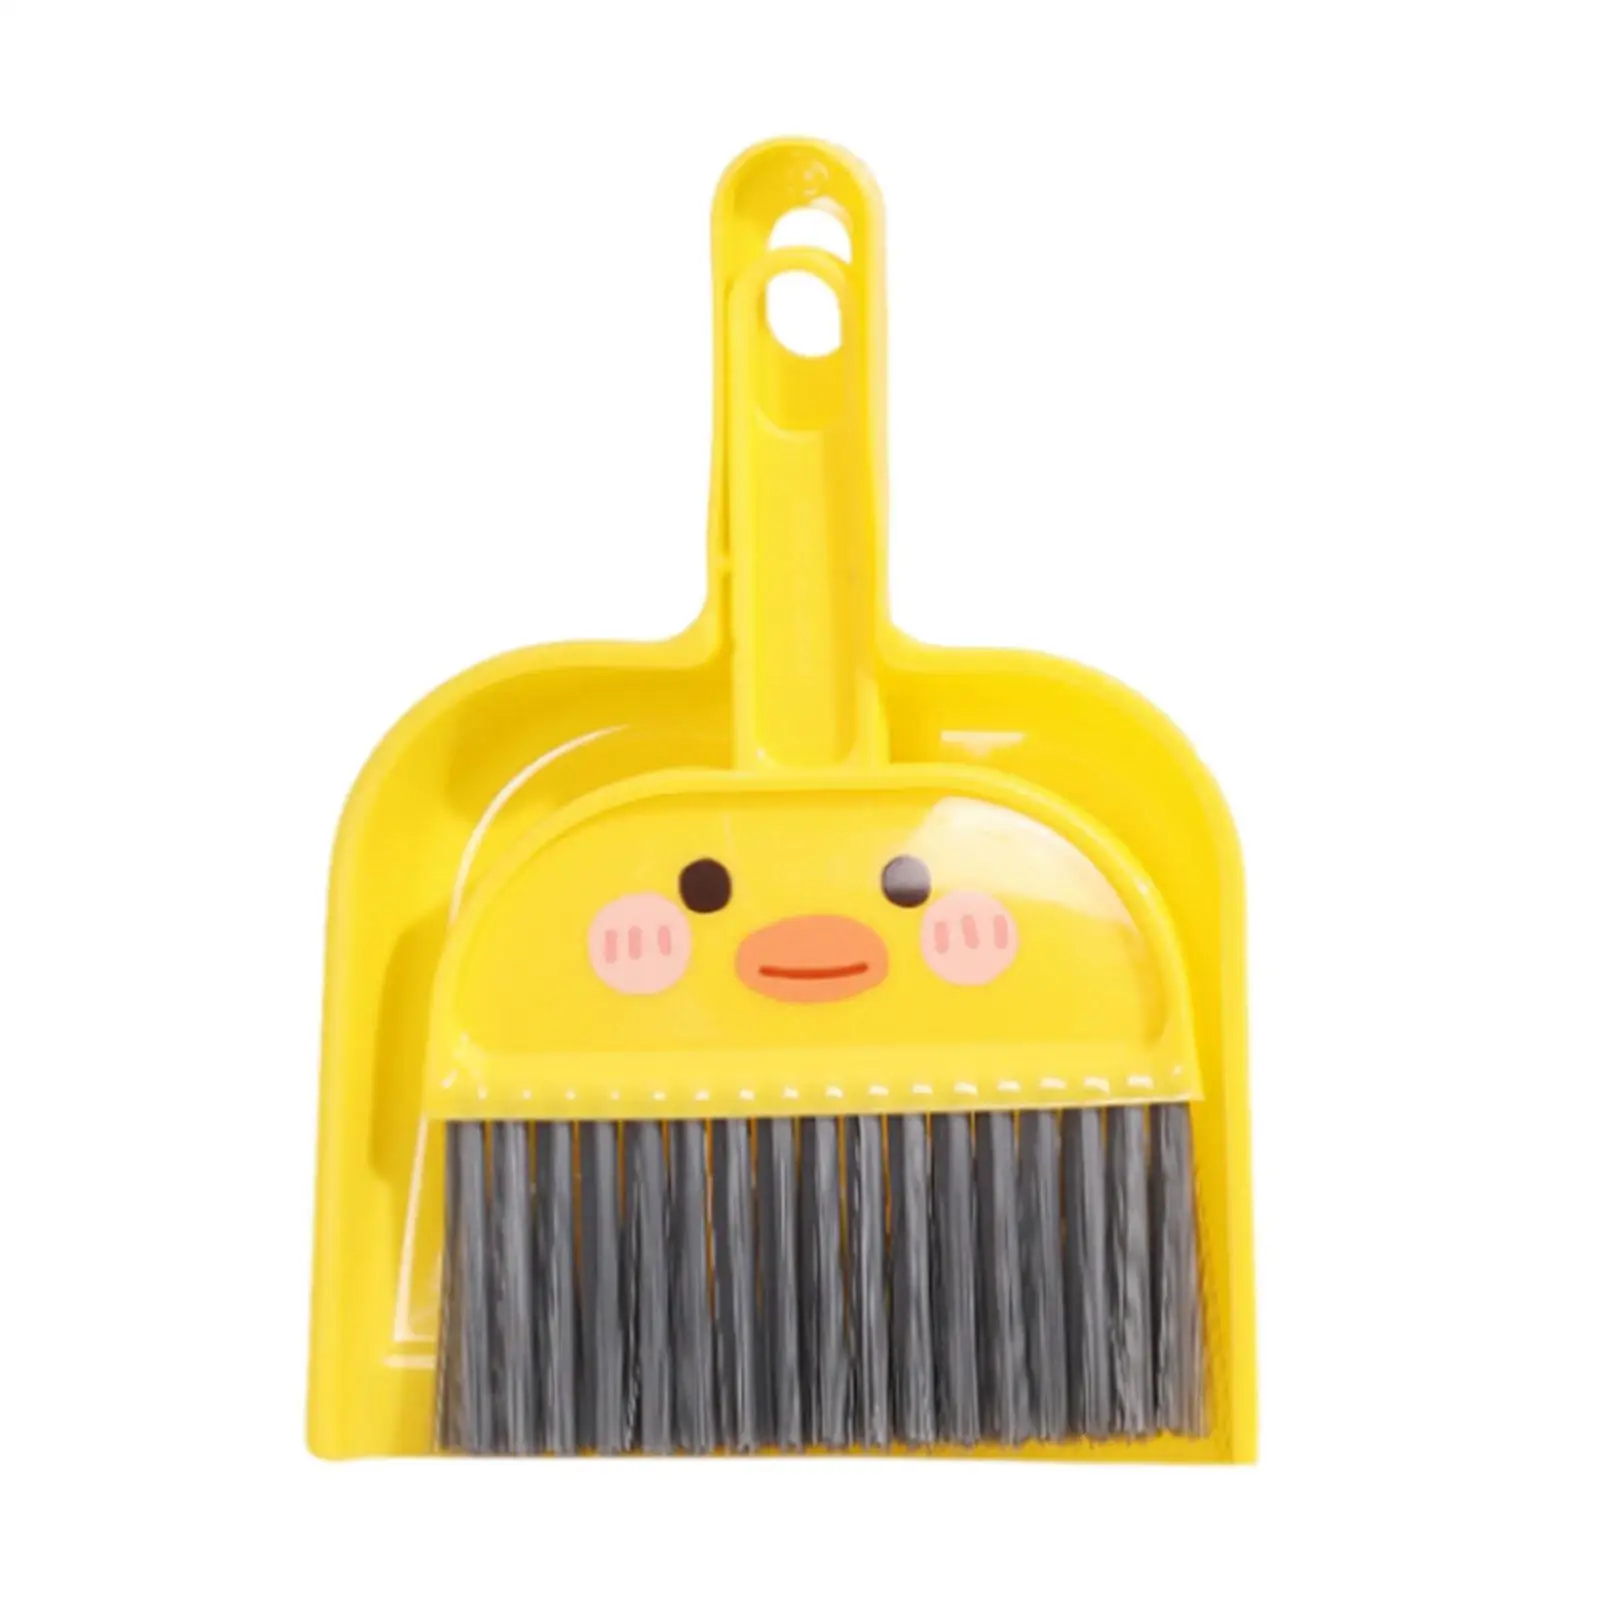 Small Dustpan and Broom Set Yellow Duck Pattern Kids Cleaning Set Housekeeping for Desk Table Countertop Carpets Small Messes